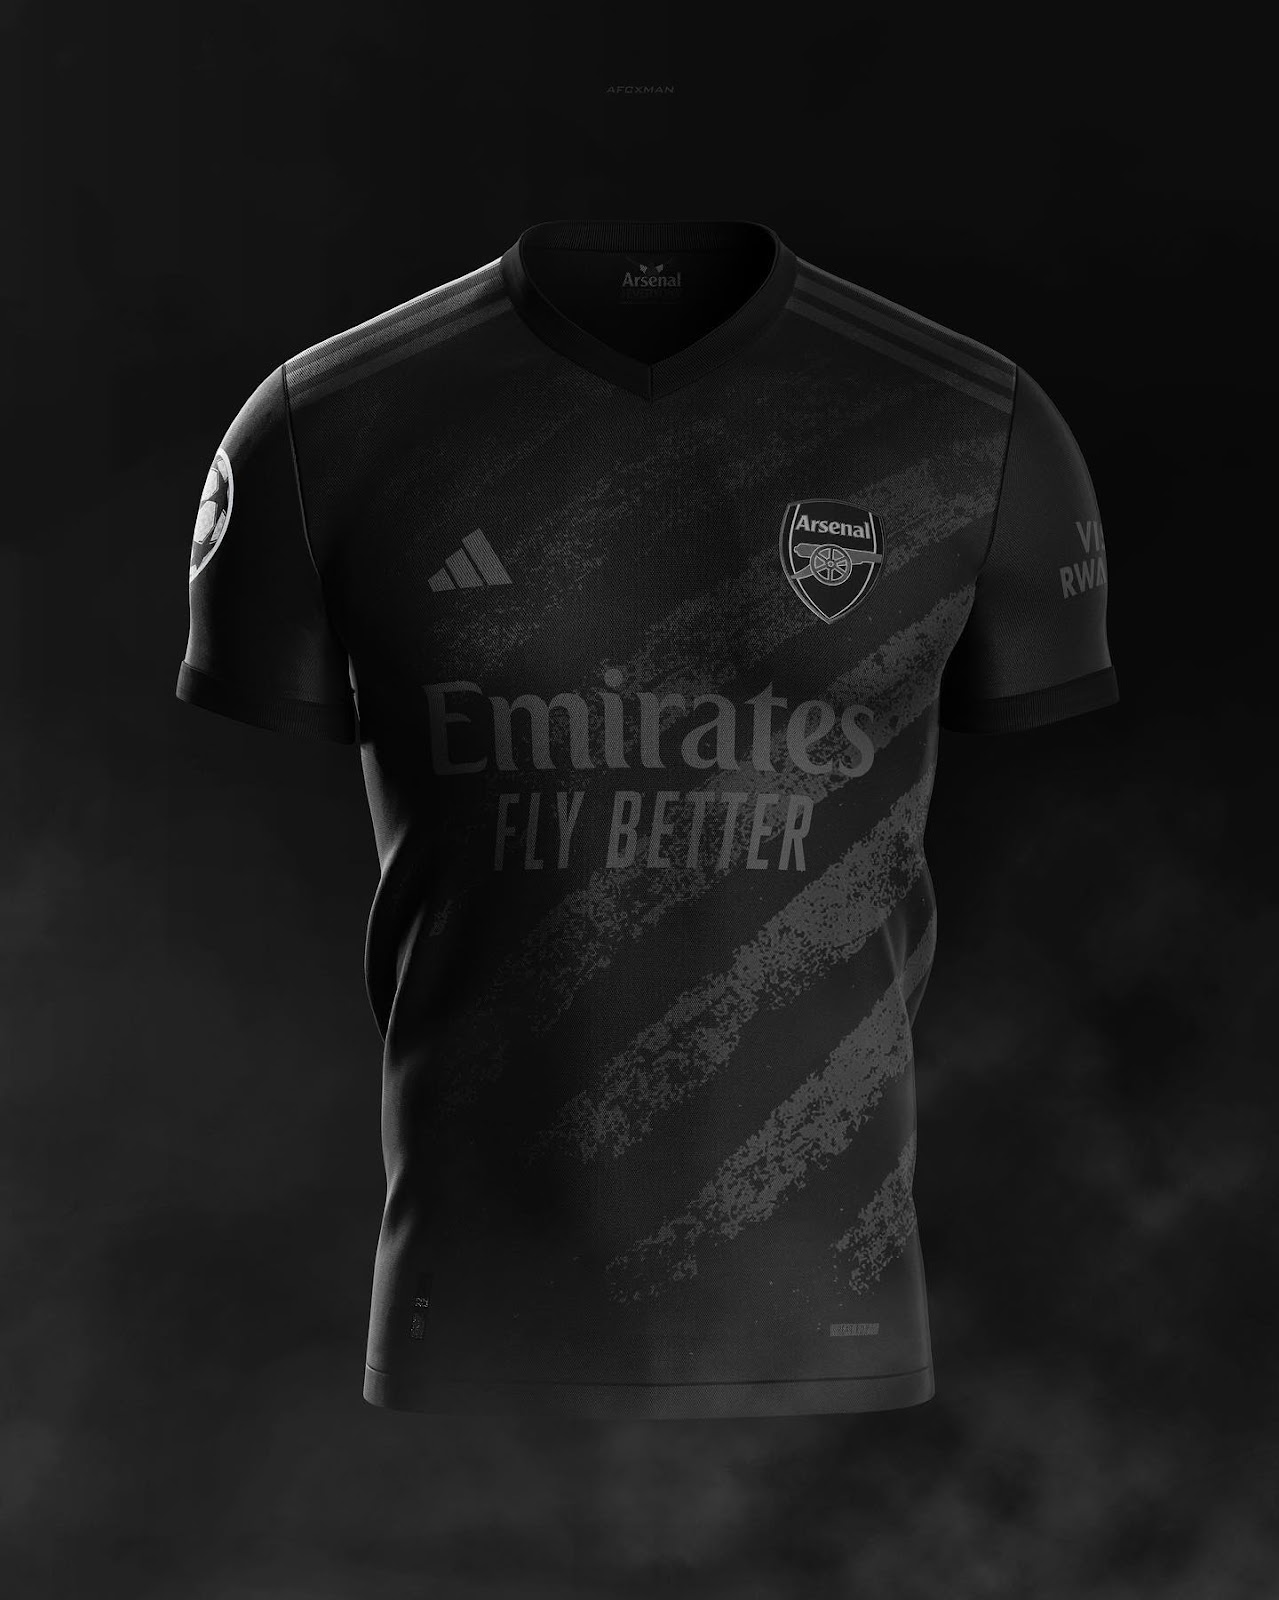 Arsenal Away Kit For 2022 23 Season 'leaked' Online With New Black 'stealth' Design Which Will Be First In Their History. The US Sun